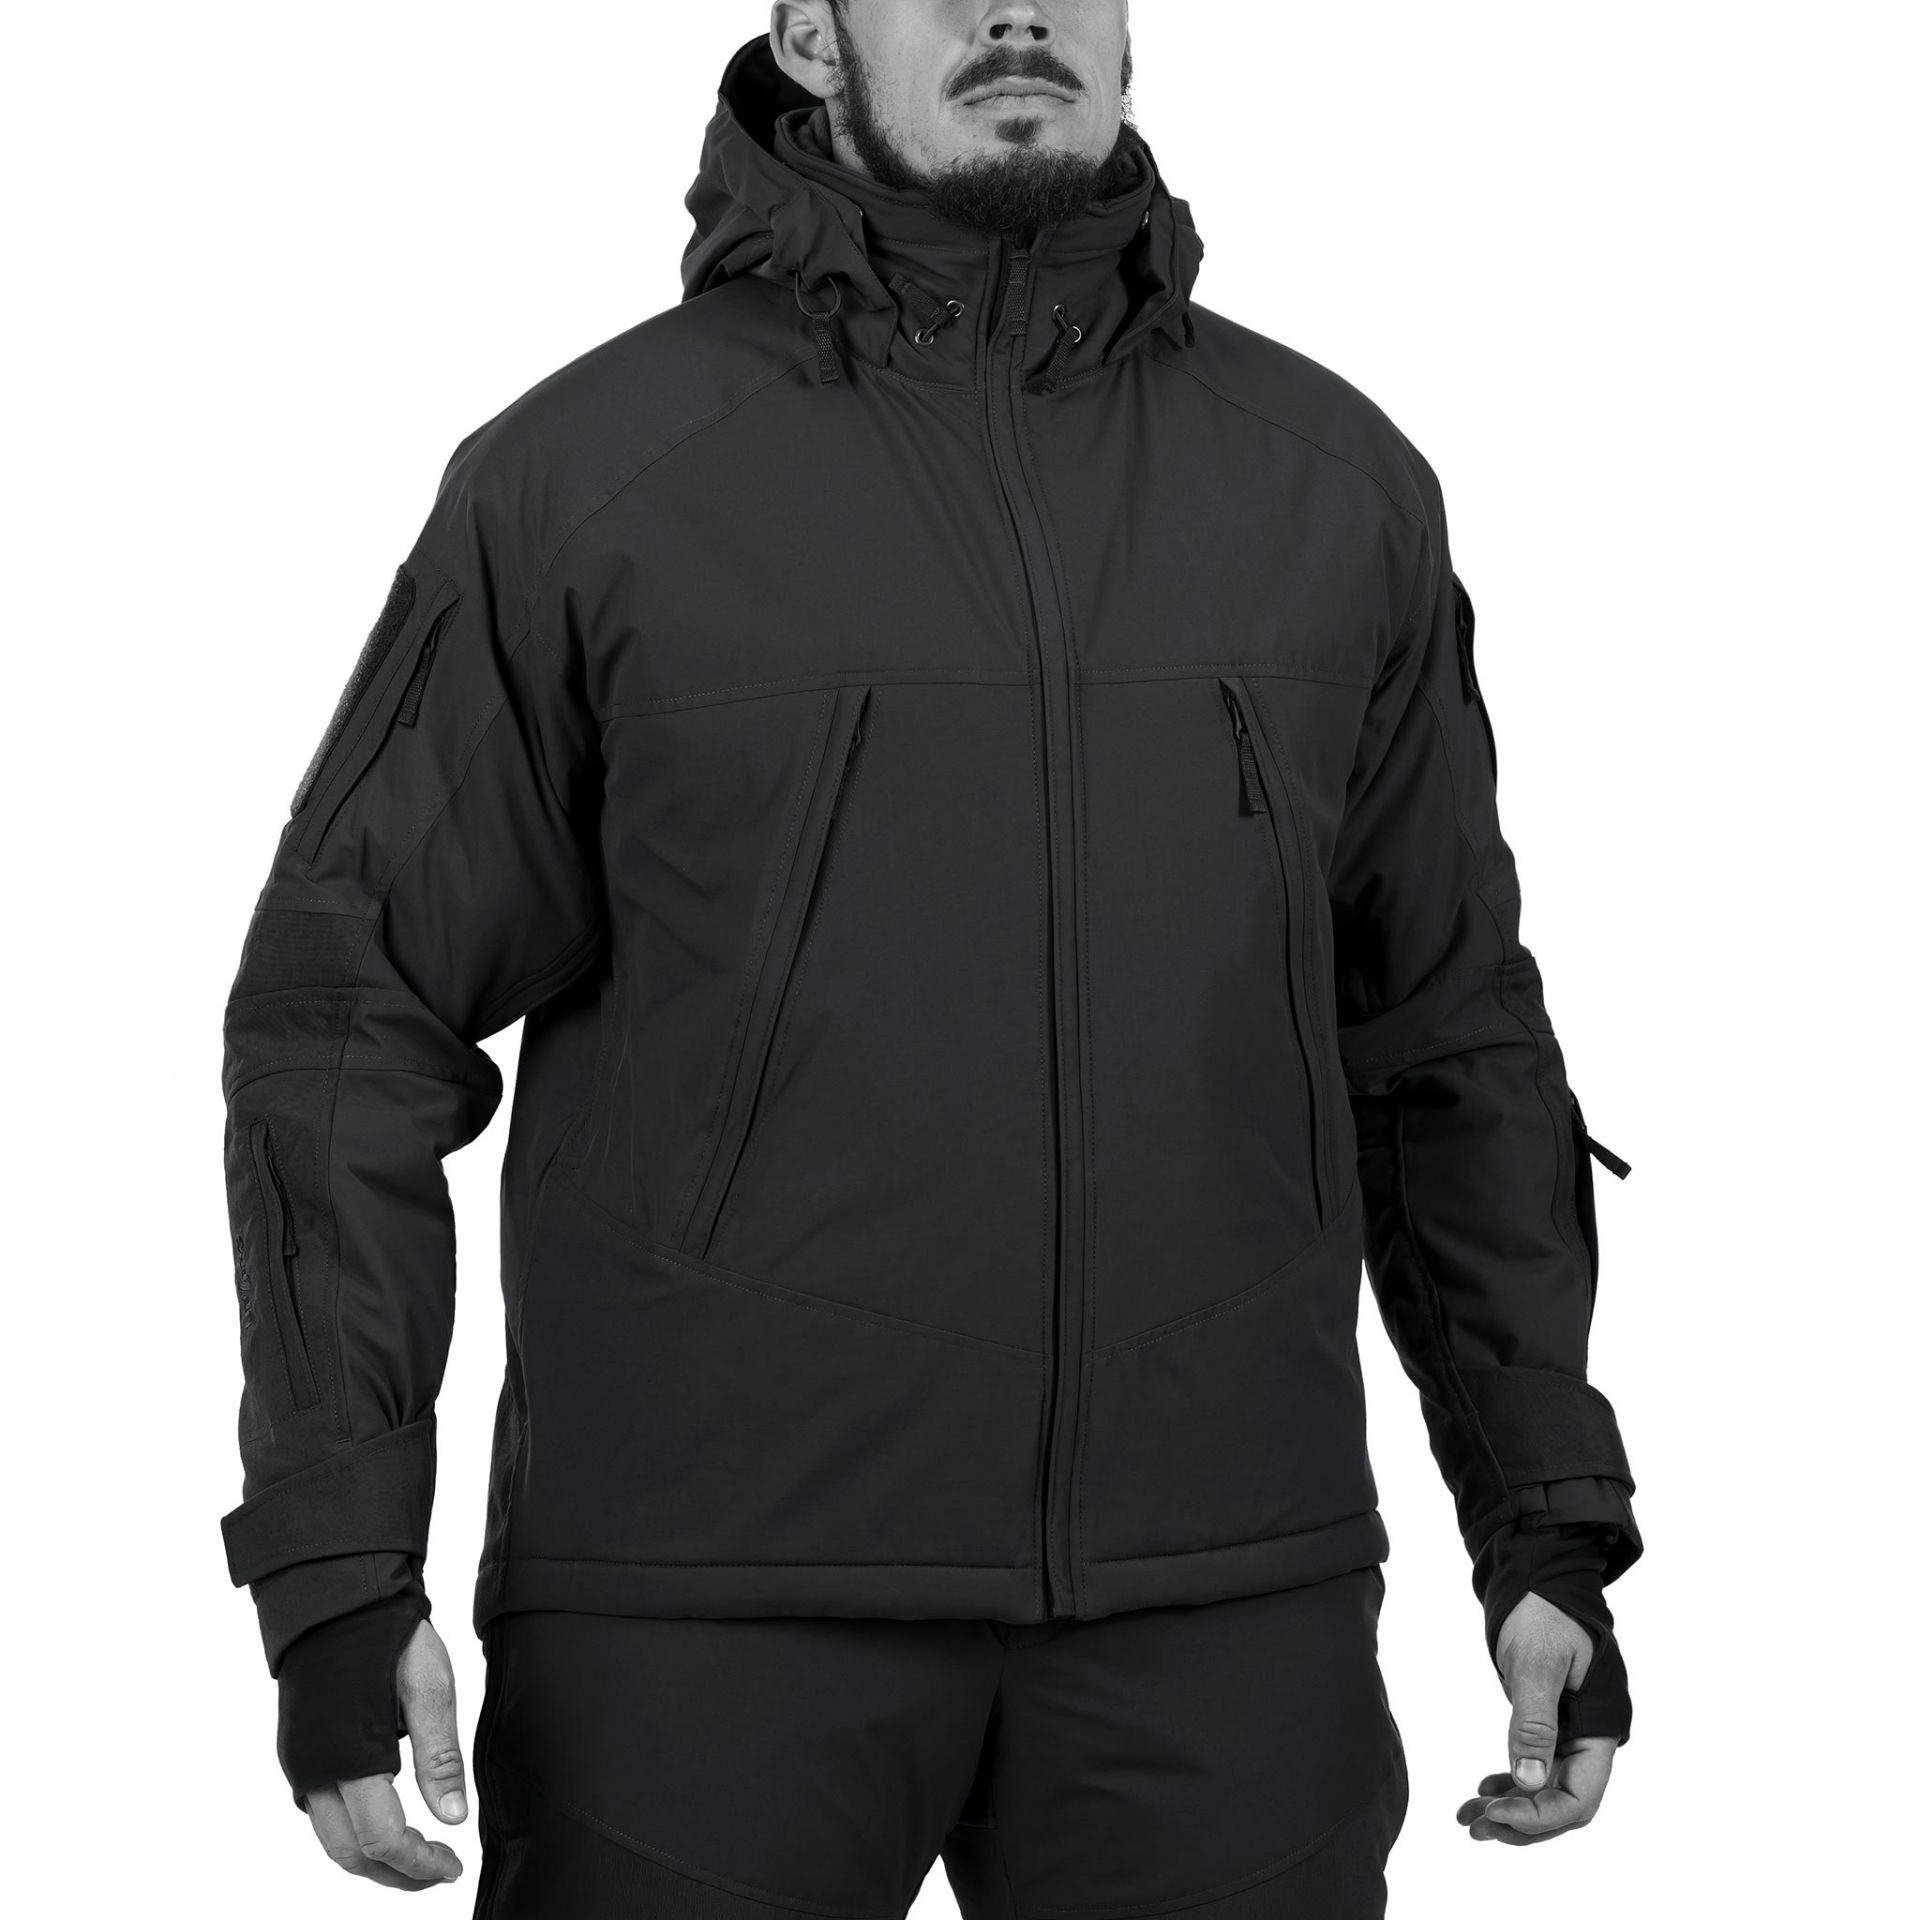 5-in-1 Jacket 2.0: Ultimate All-Weather Protection